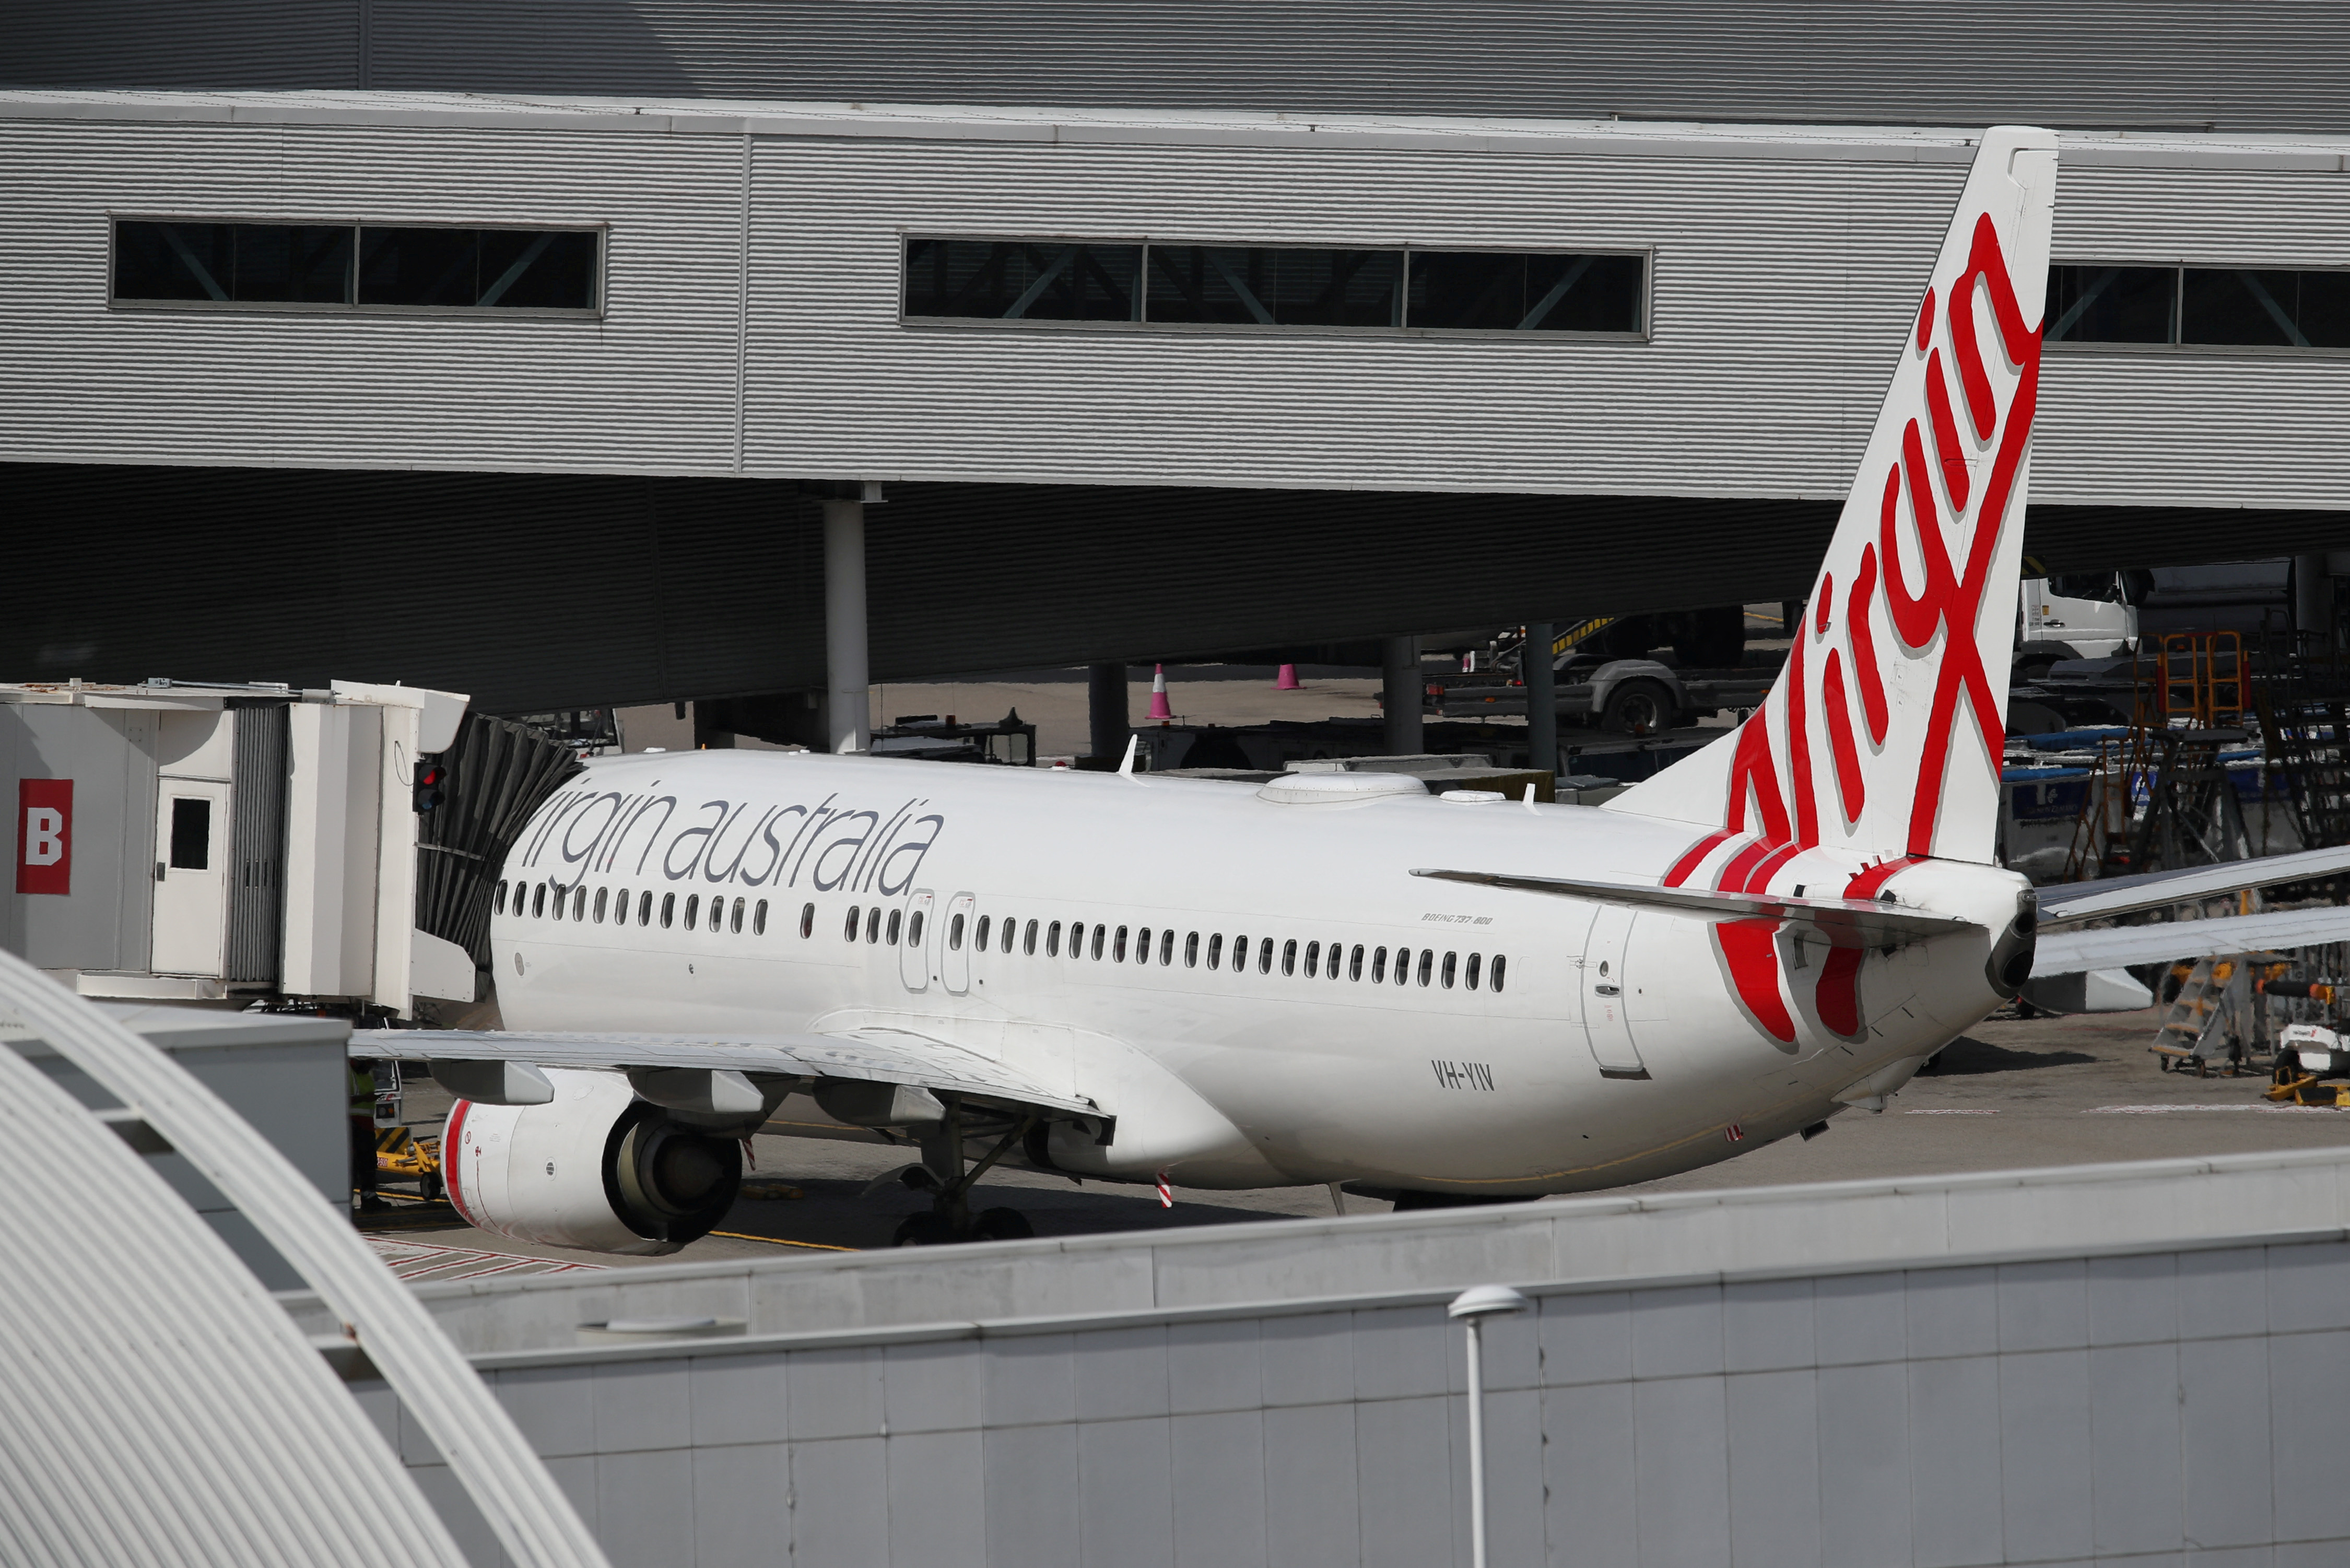 A Virgin Australia Airlines plane is seen at Kingsford Smith International Airport after Australia implemented an entry ban on non-citizens and non-residents due to the coronavirus disease (COVID-19) in Sydney